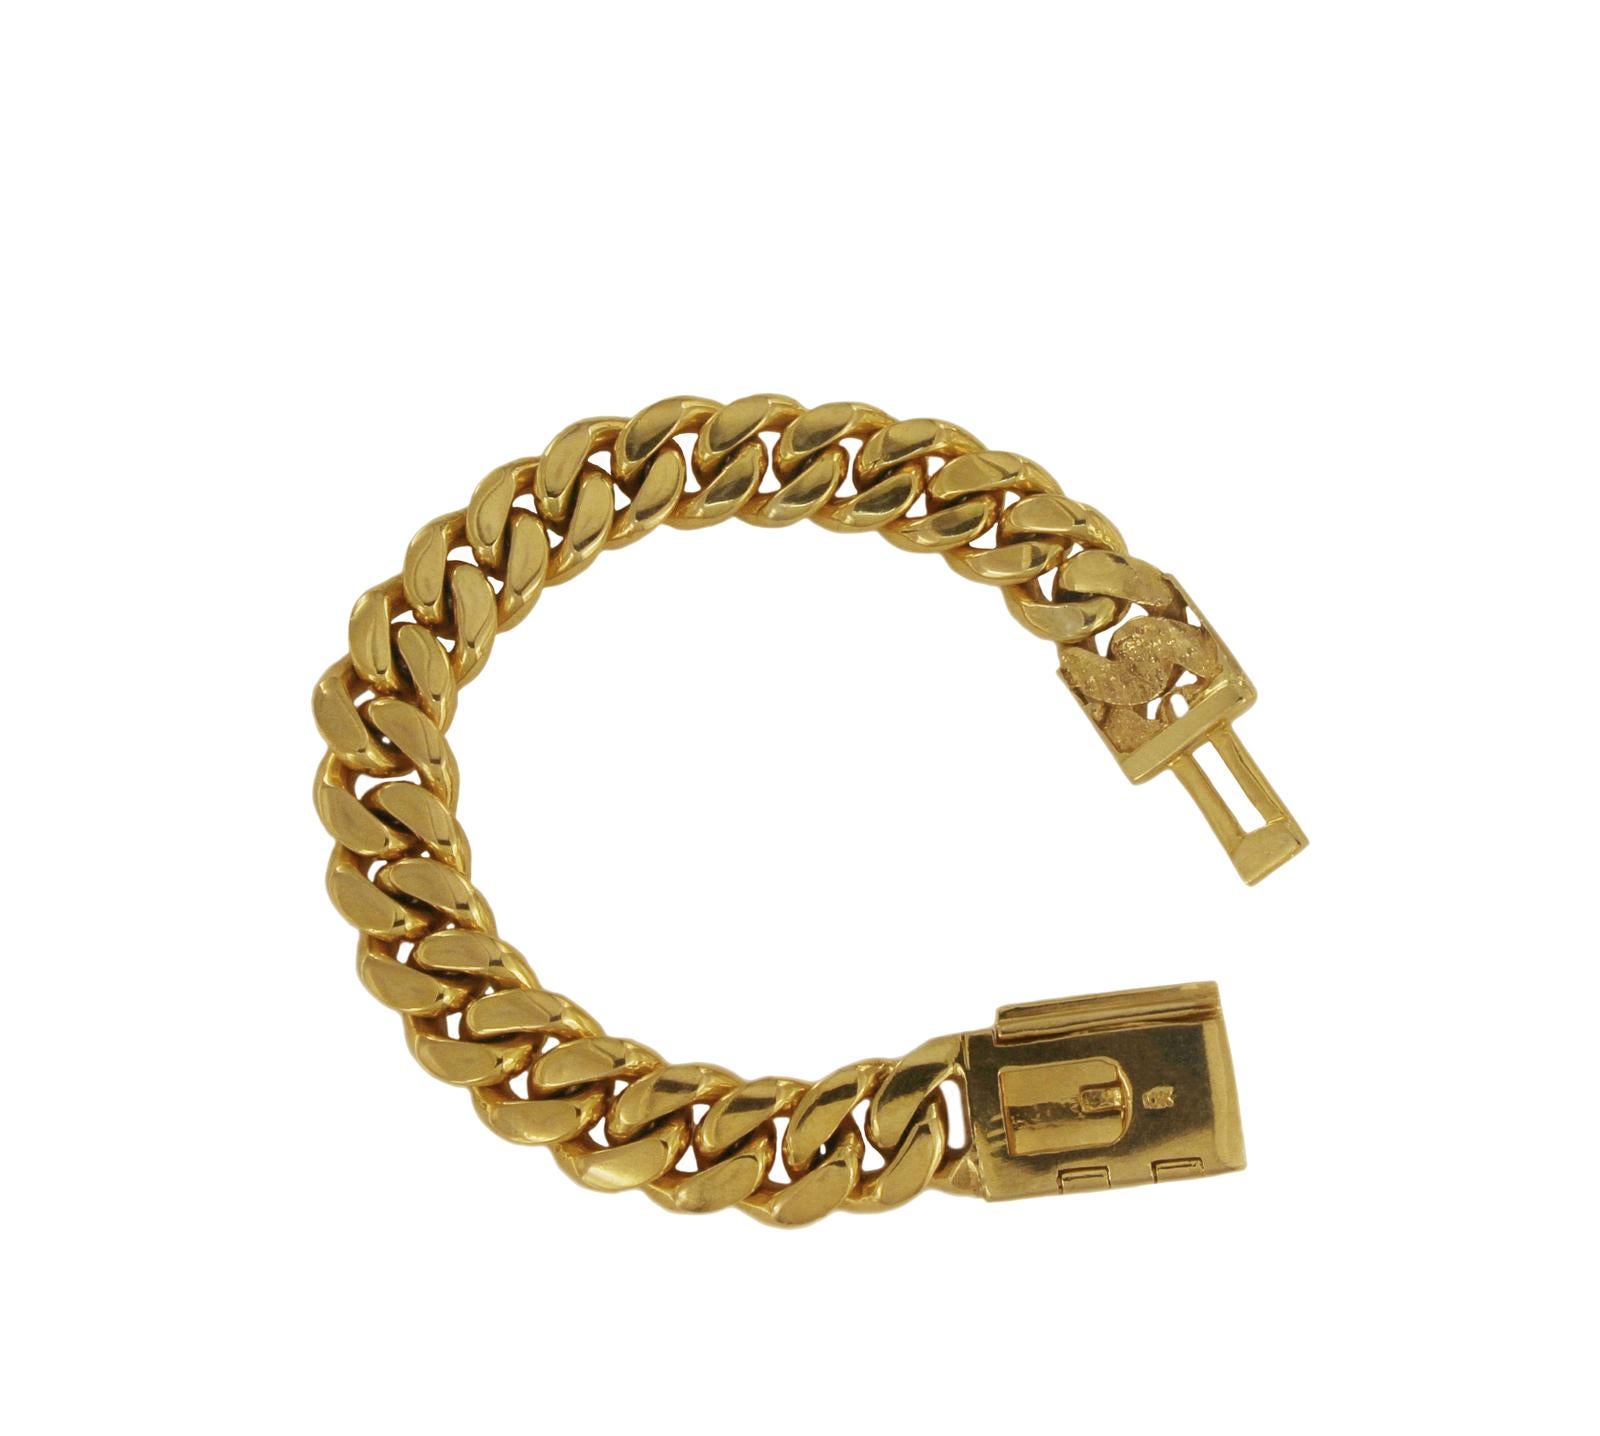 CUSTOM MADE DIAMOND MIAMI CUBAN LINK SOLID BRACELET IN 10K GOLD.

-10k yellow gold
-Length: 8.5”
-Width: 0.55”
-Weight: 114.5 gr
-Diamond: 12.90 ct, VS clarity, G color

Retail: $15,000